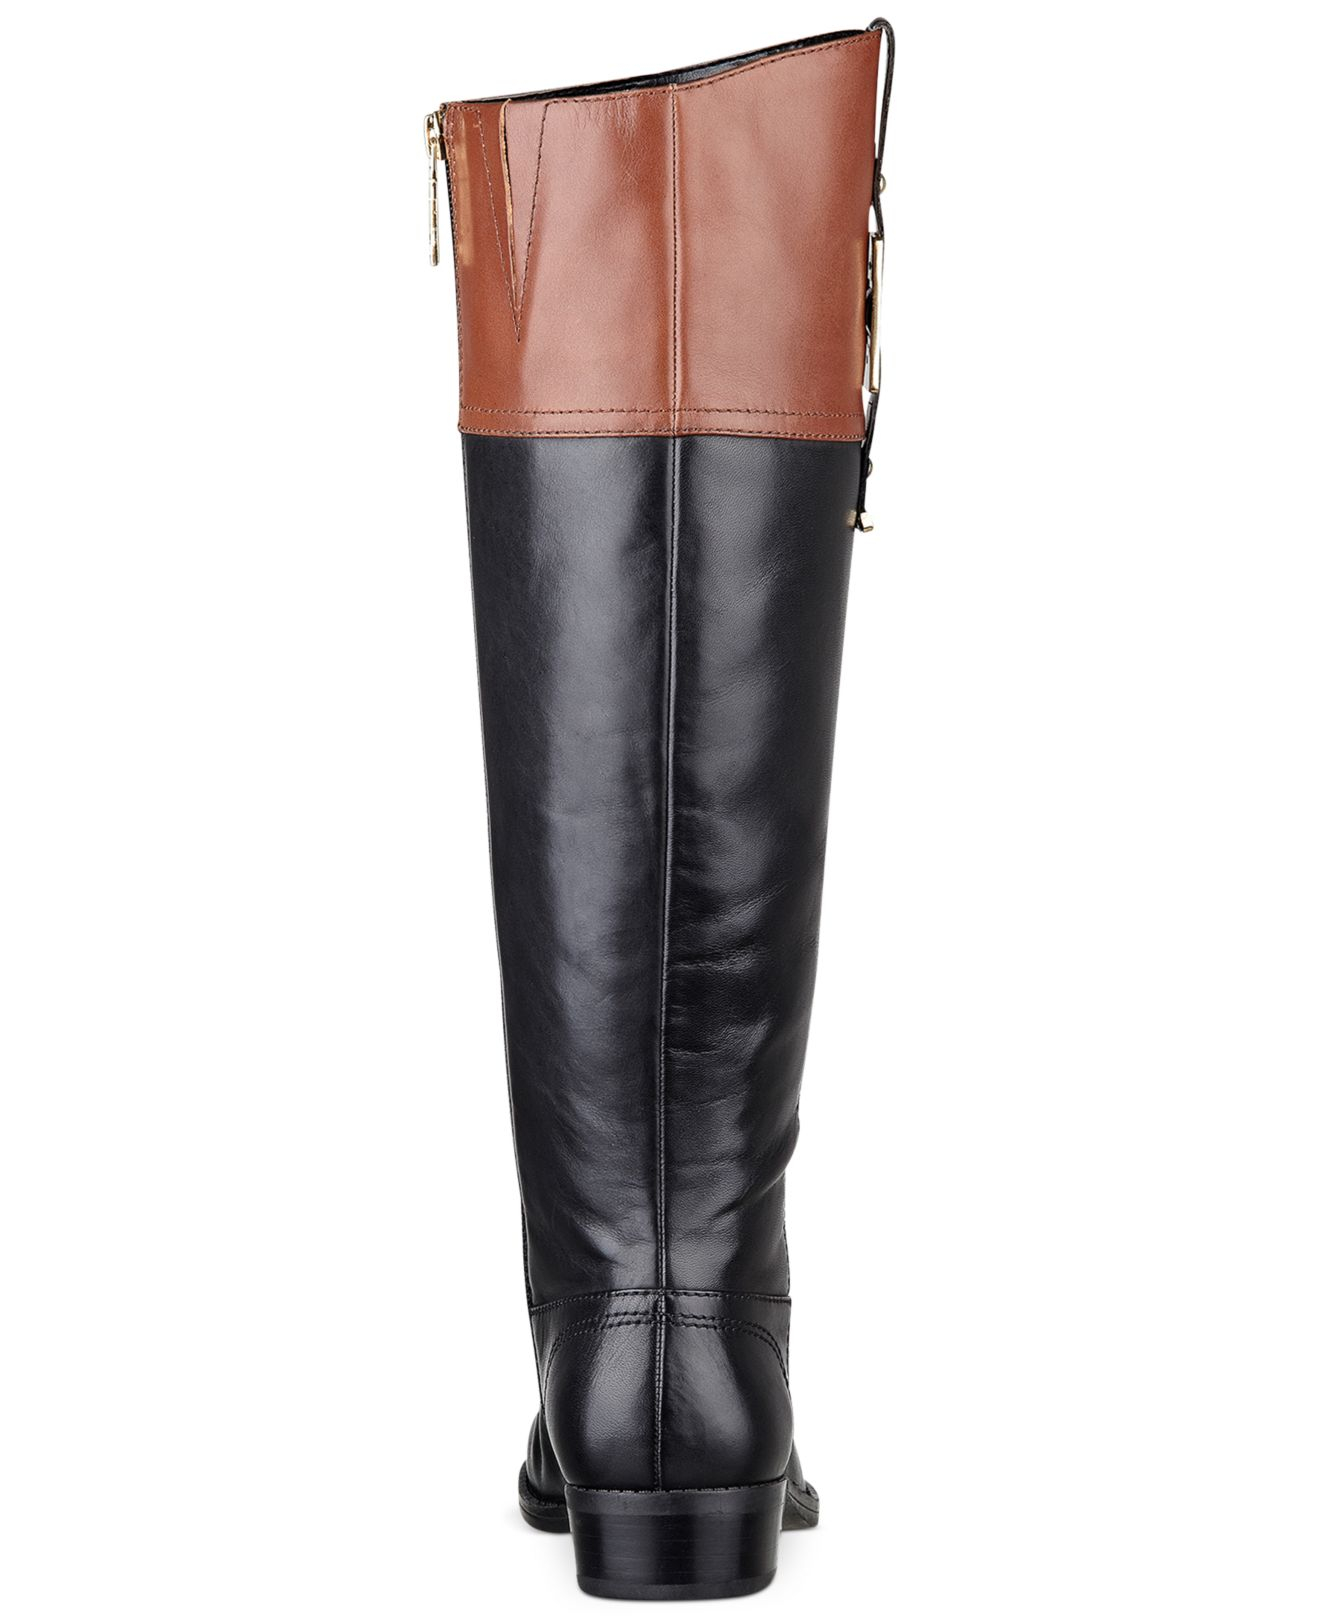 Gibsy Tall Riding Boots in Black 